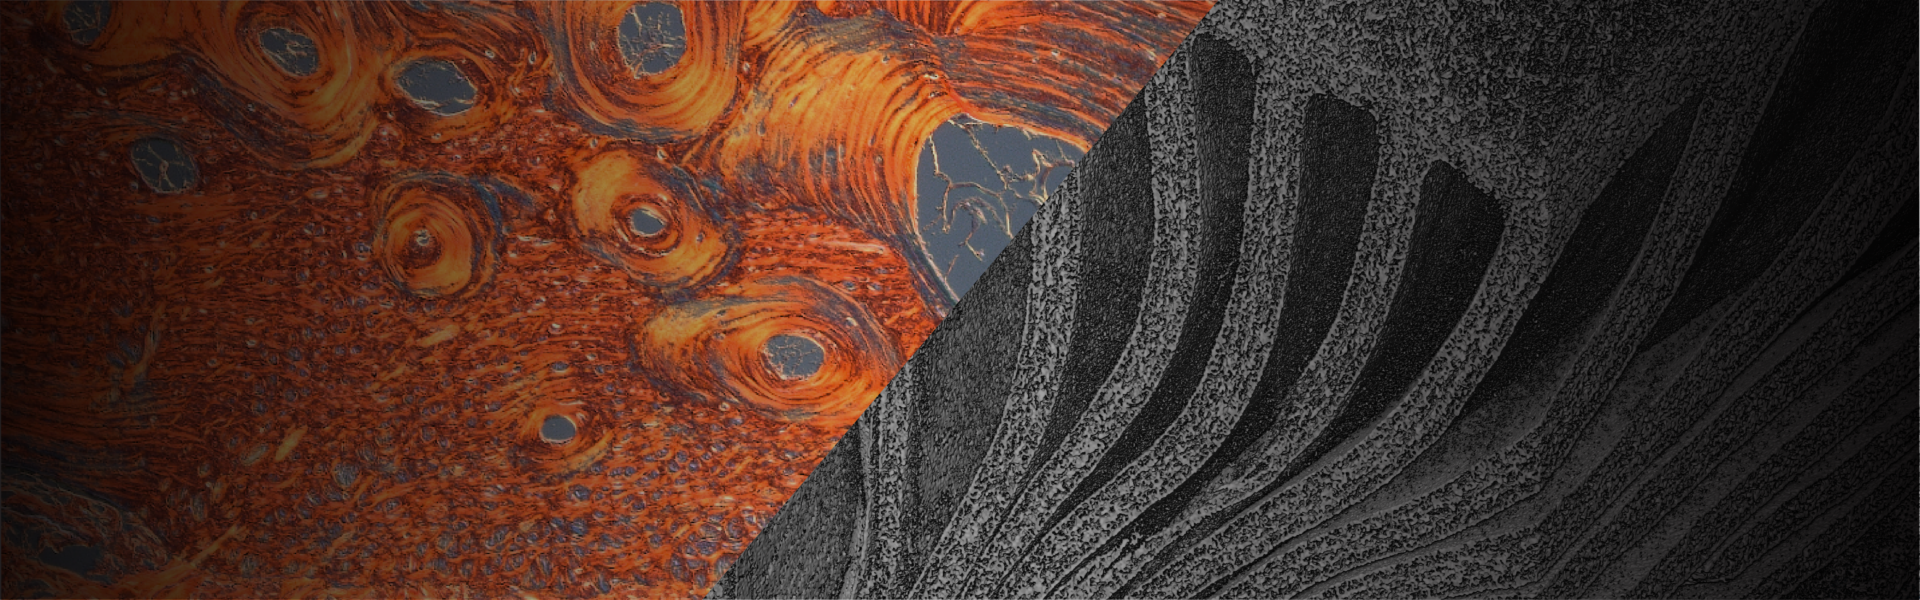 A collage of two scientific research images shows a lizard's osteoderm in red, orange and gray beside the structure of an oyster mushroom in black, white and gray.